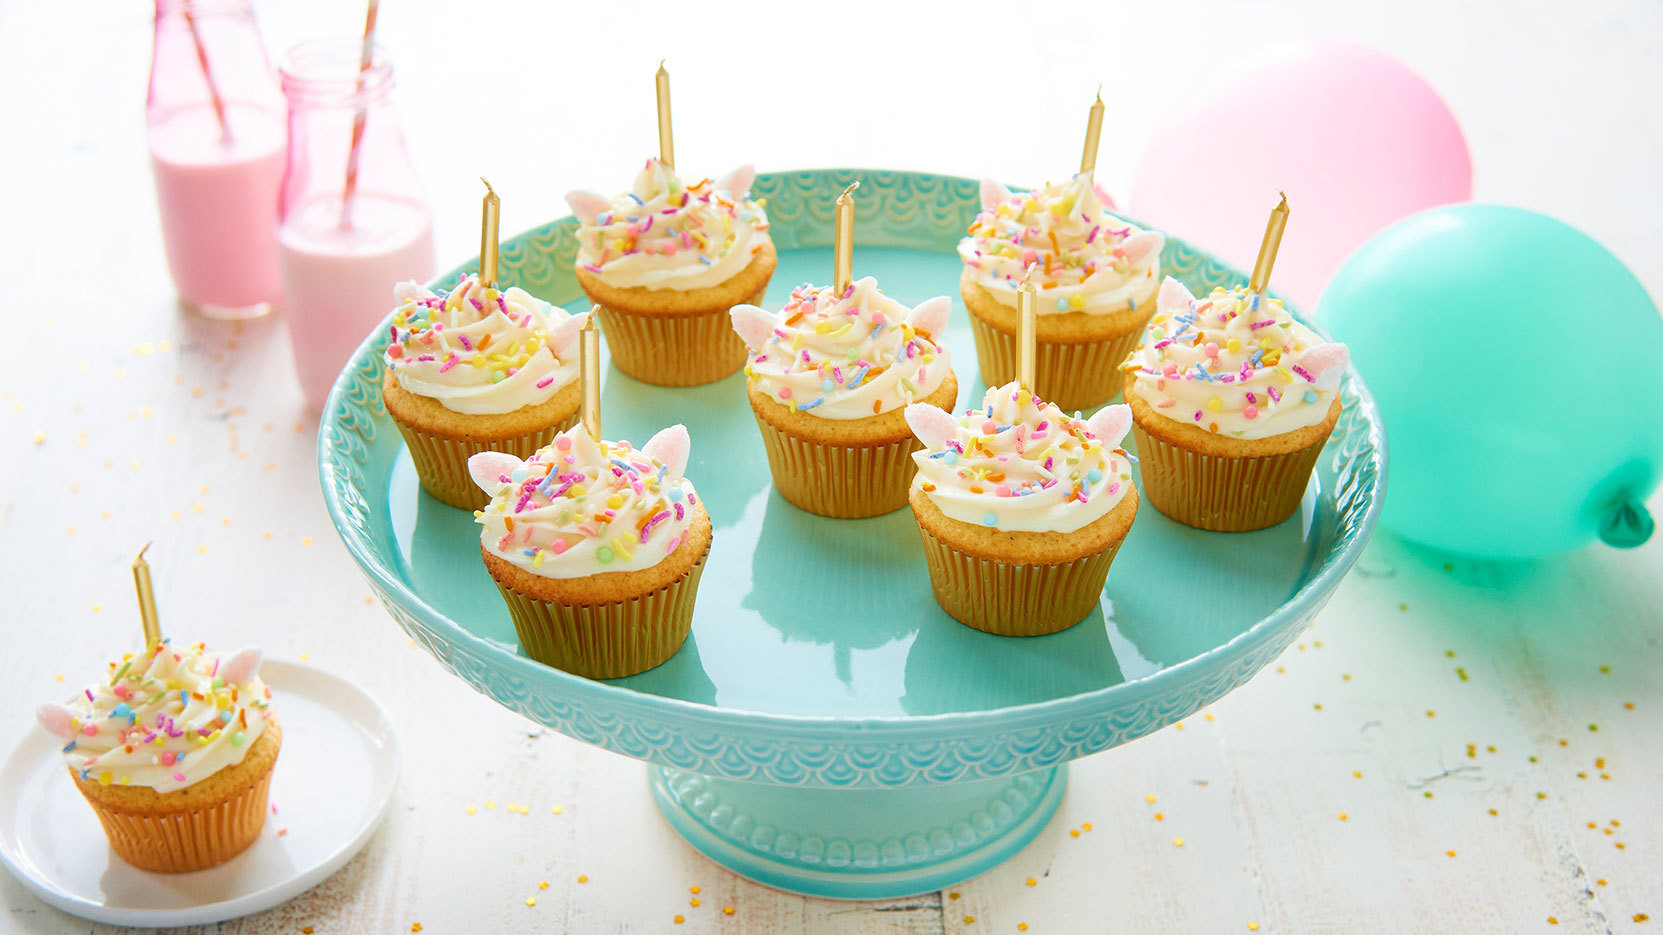 Healthy Unicorn Party Food Ideas
 Magical Unicorn Birthday Party Ideas for Kids EatingWell